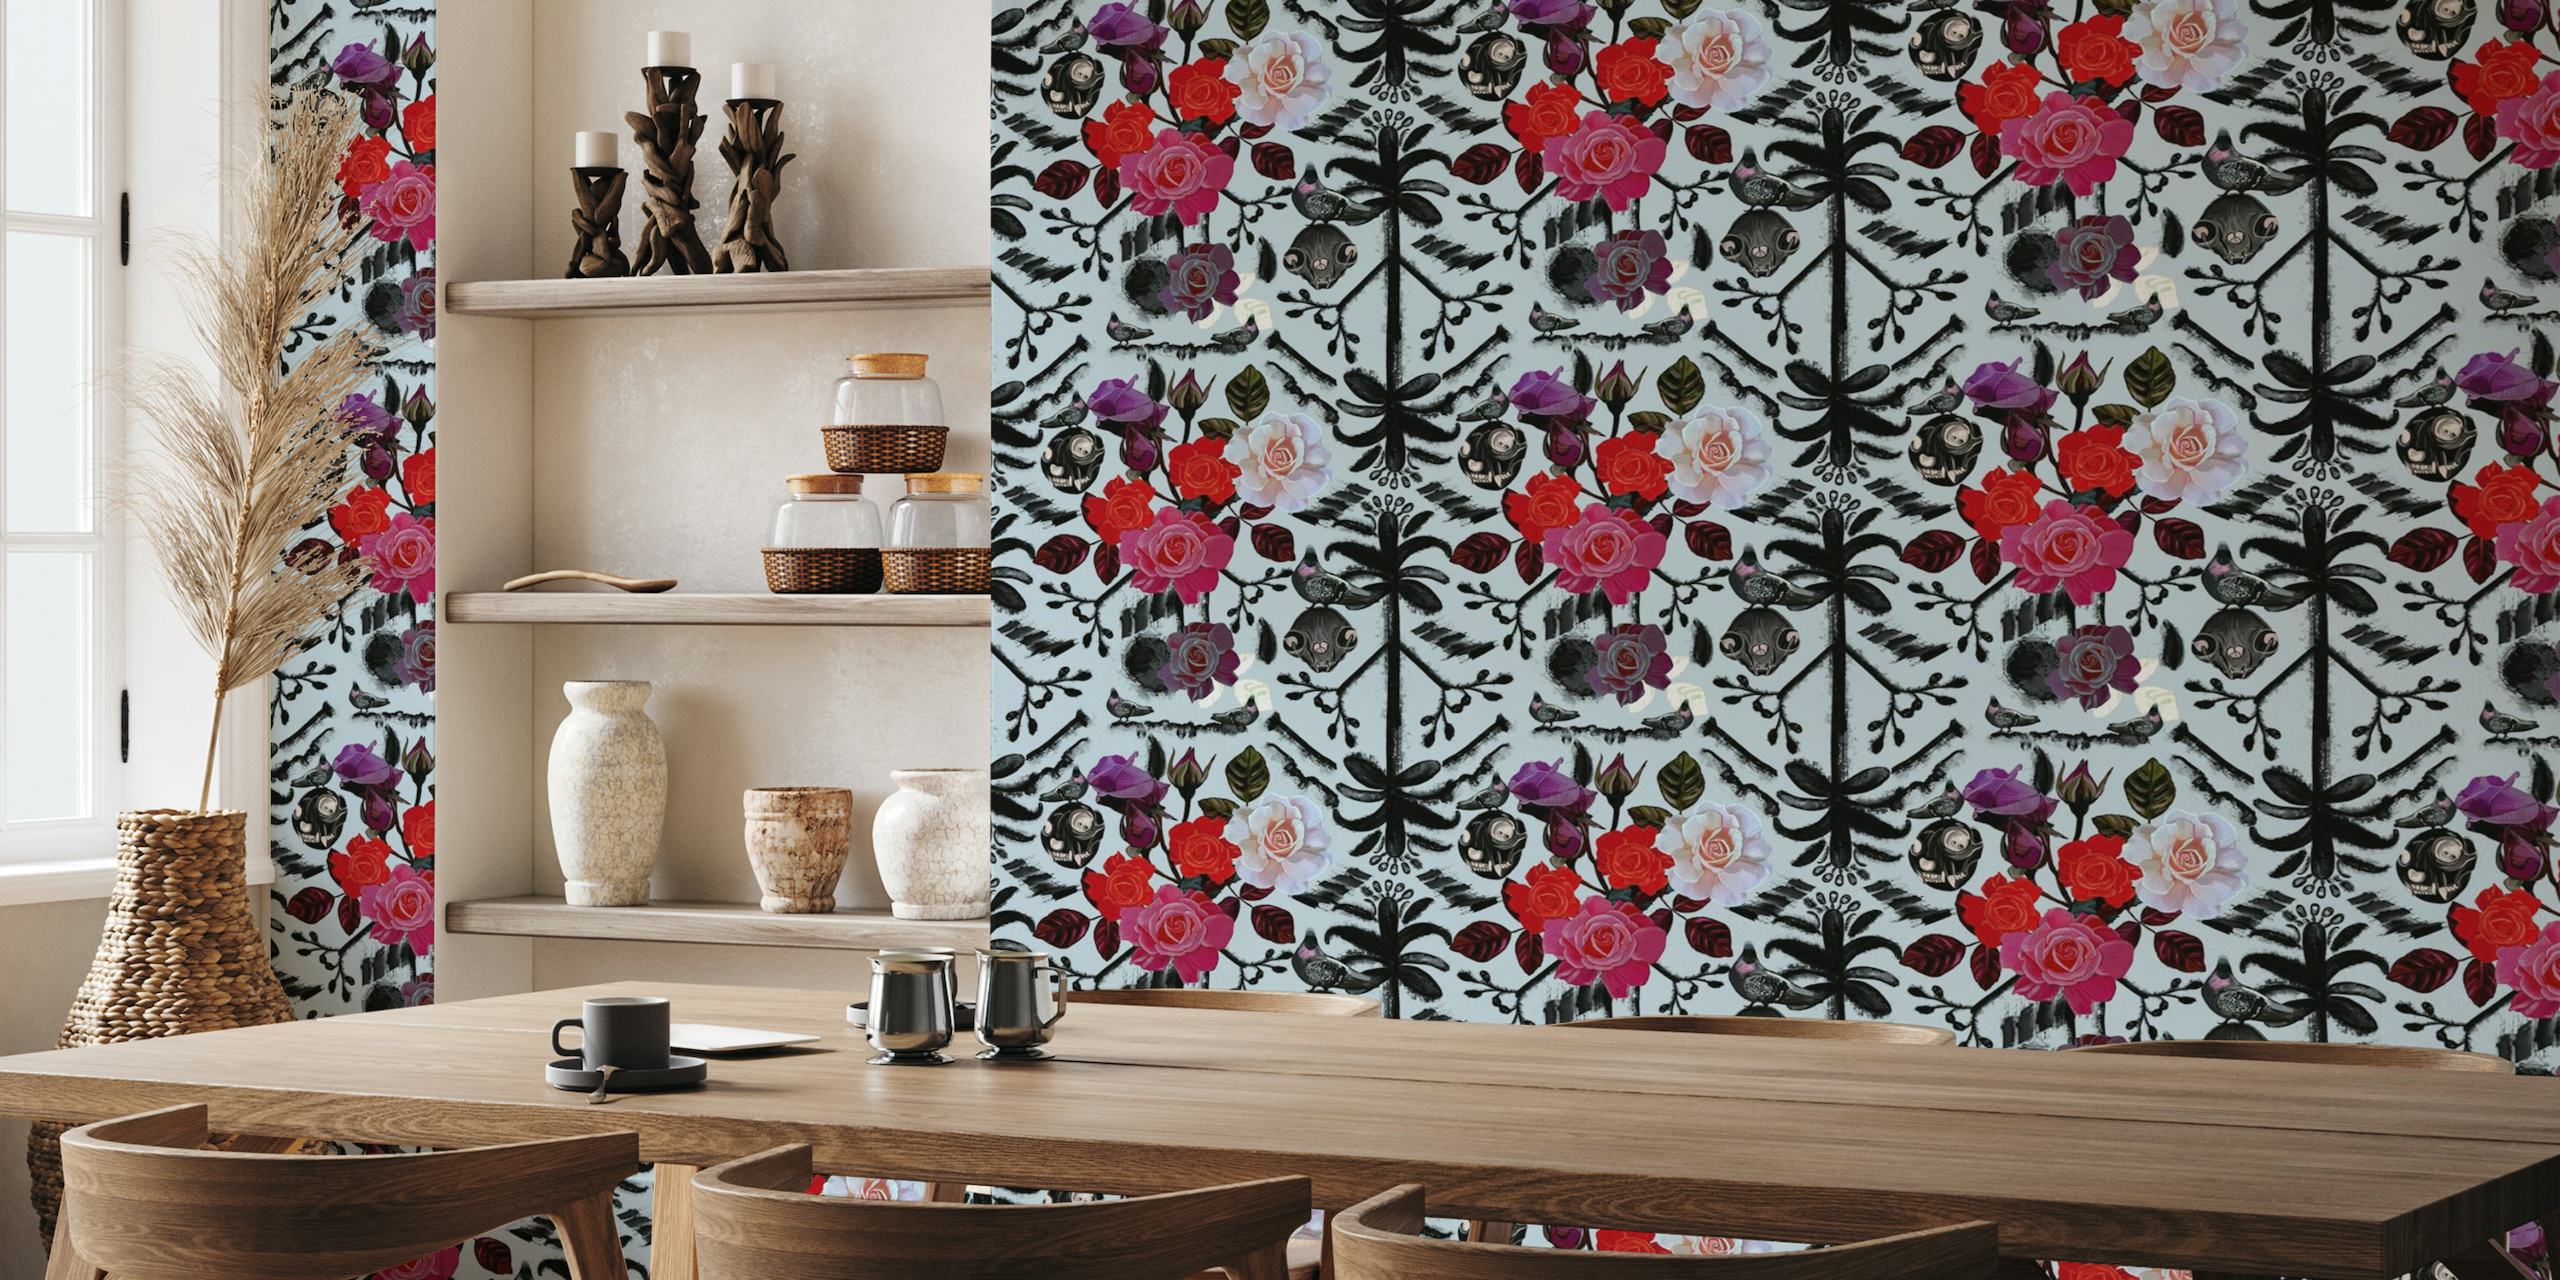 Gothic floral pattern wall mural with roses and dark motifs